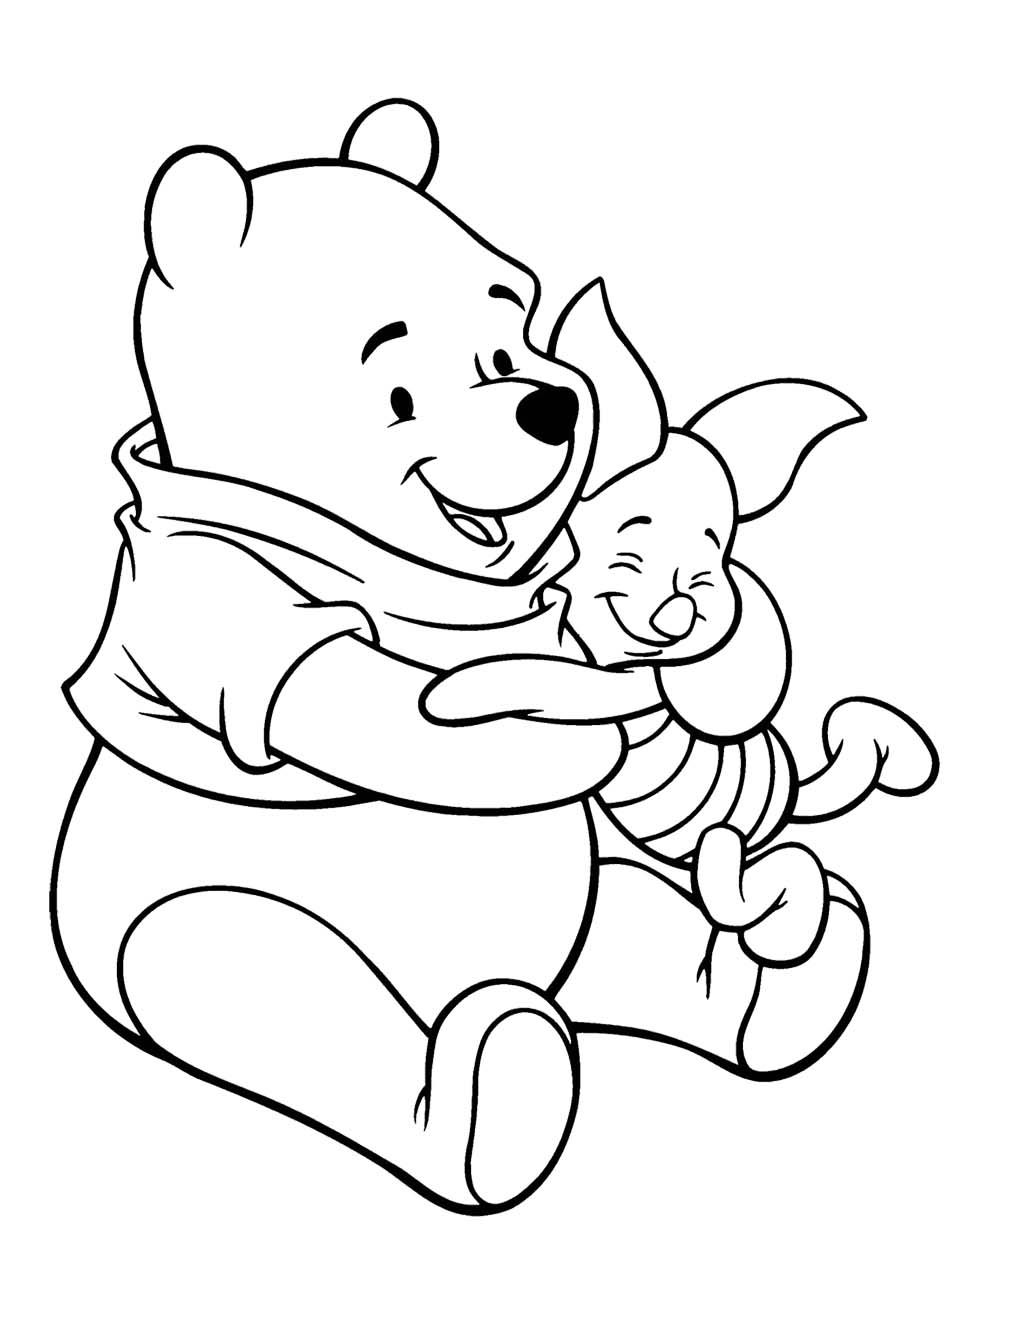 Winnie The Pooh Coloring Page ...